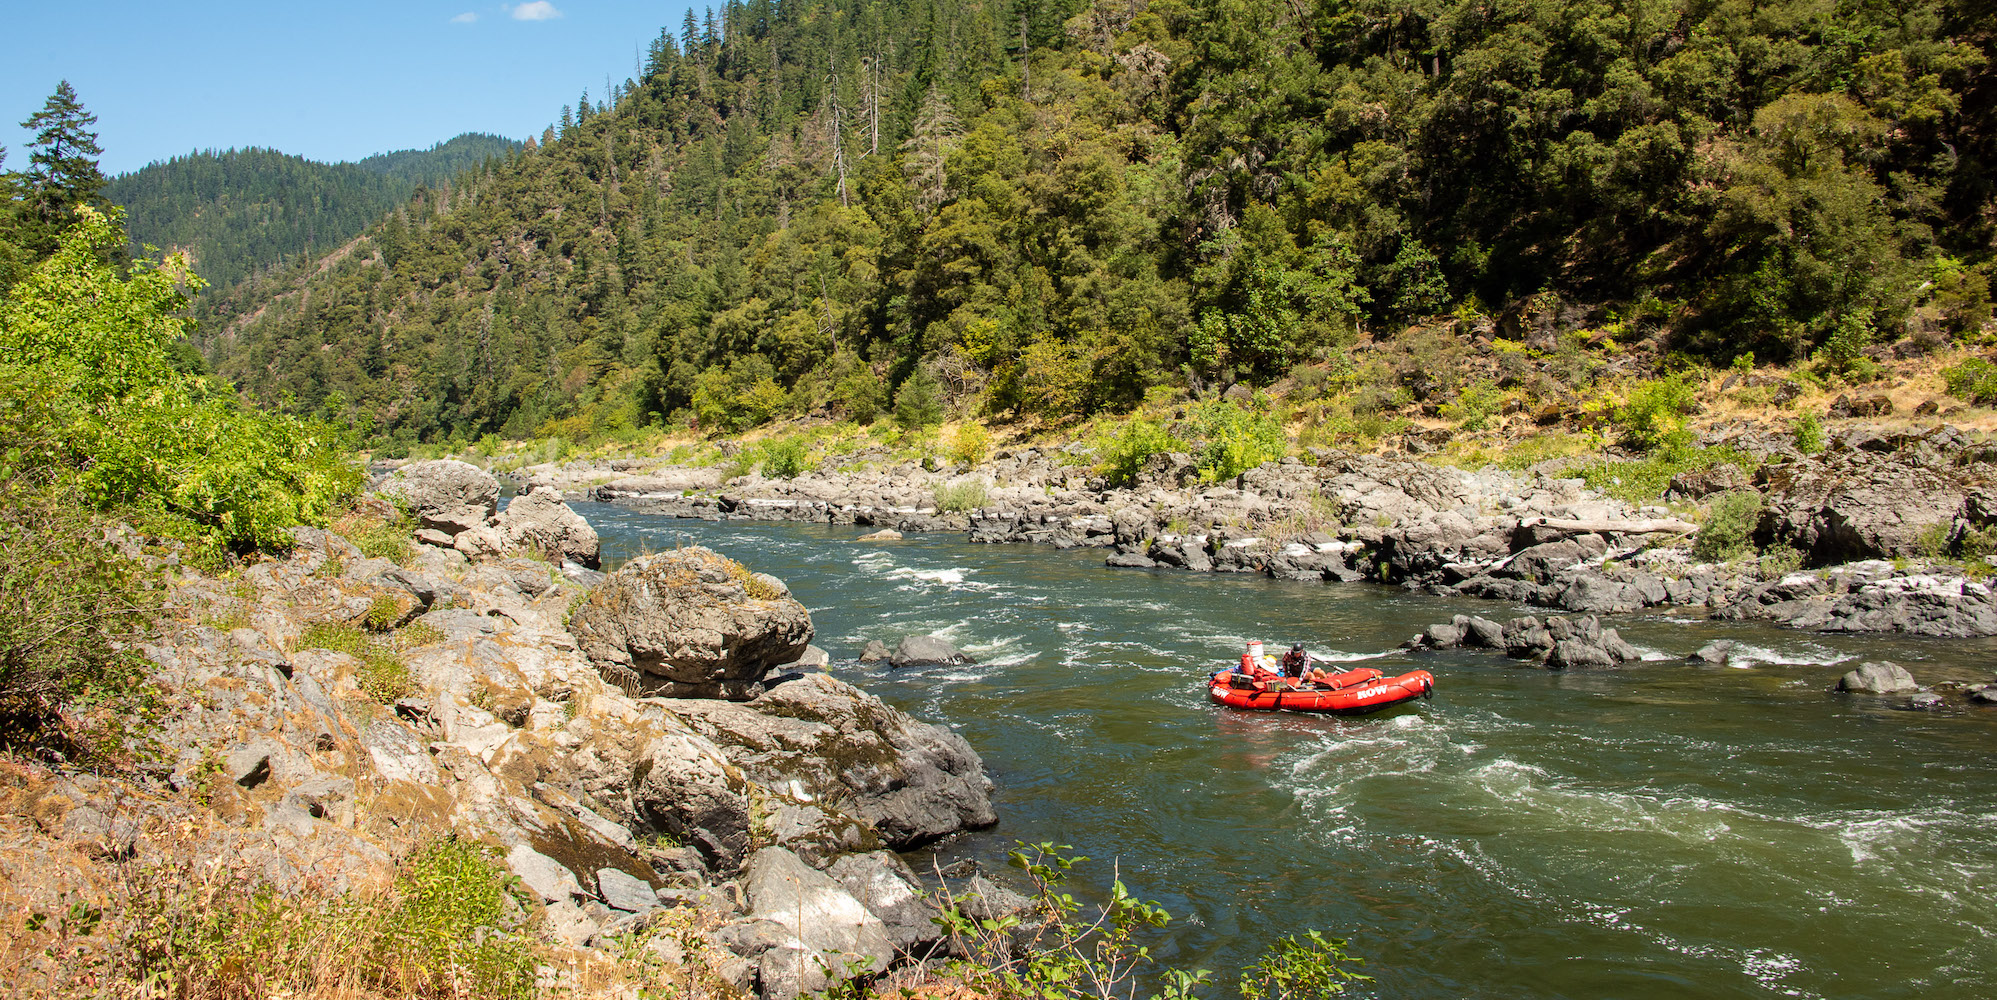 A red raft with one person in it floating downstream on the Rogue River